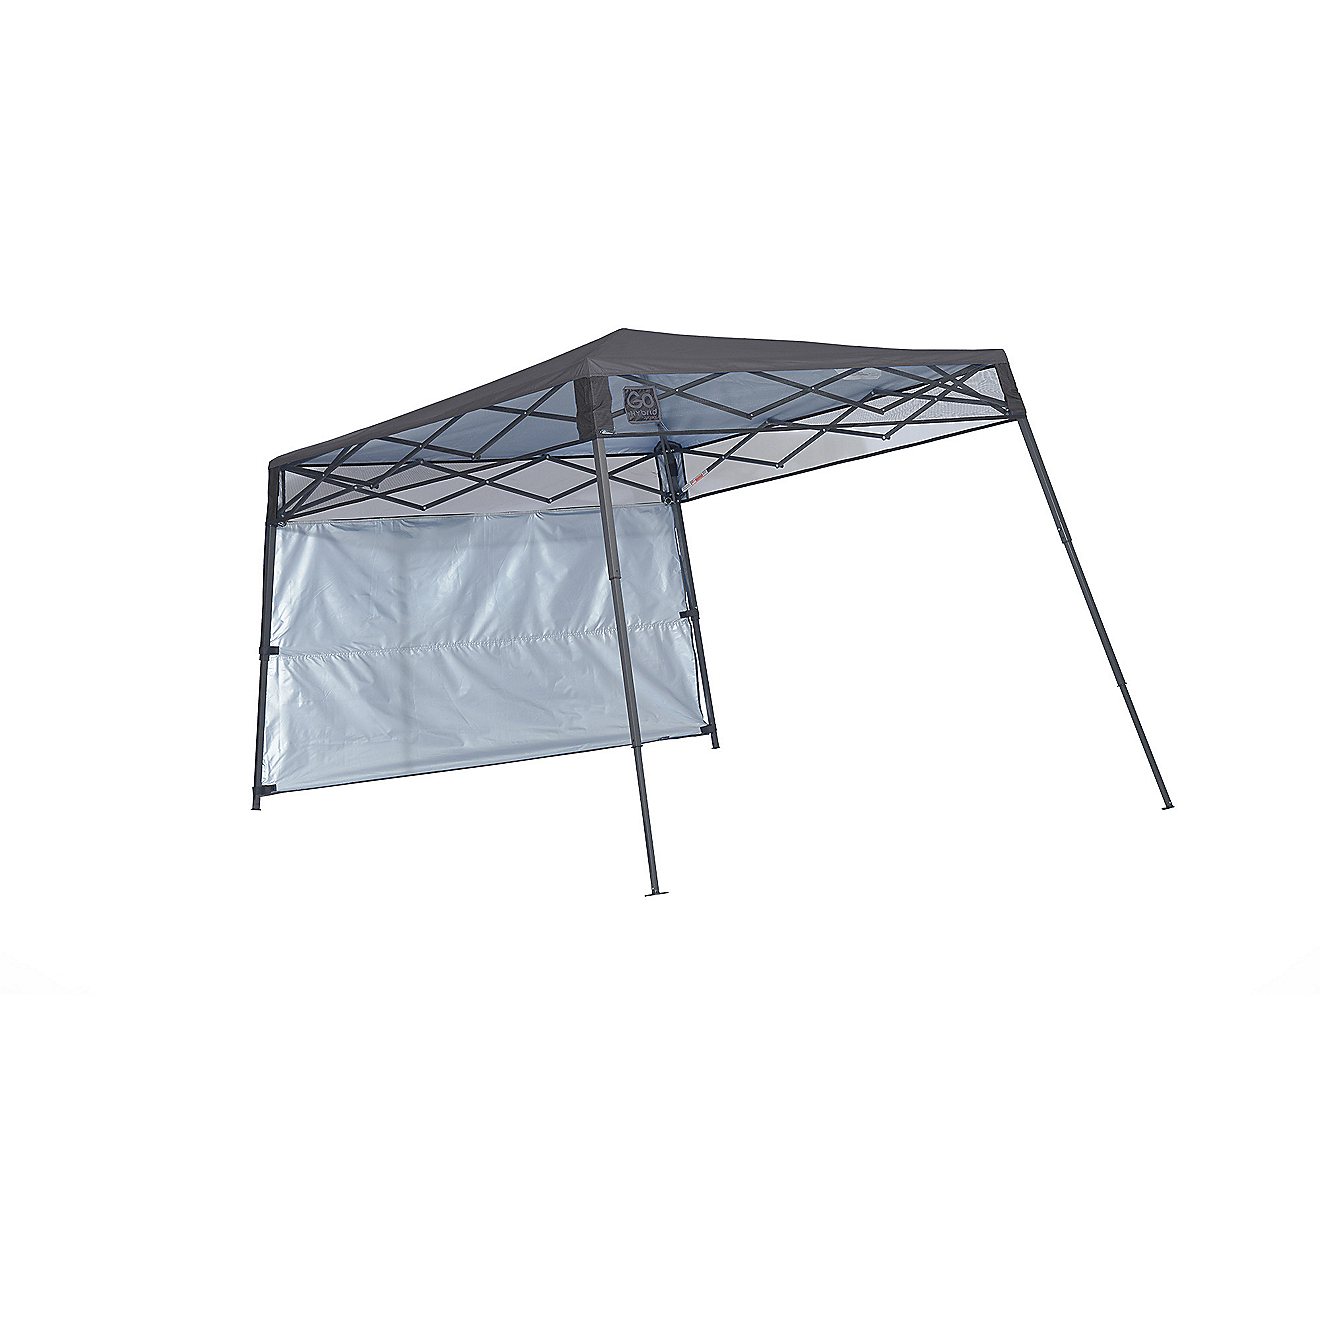 ShelterLogic Go Hybrid 7 ft x 7 ft Slant-Leg Pop-Up Canopy with Half Wall                                                        - view number 2